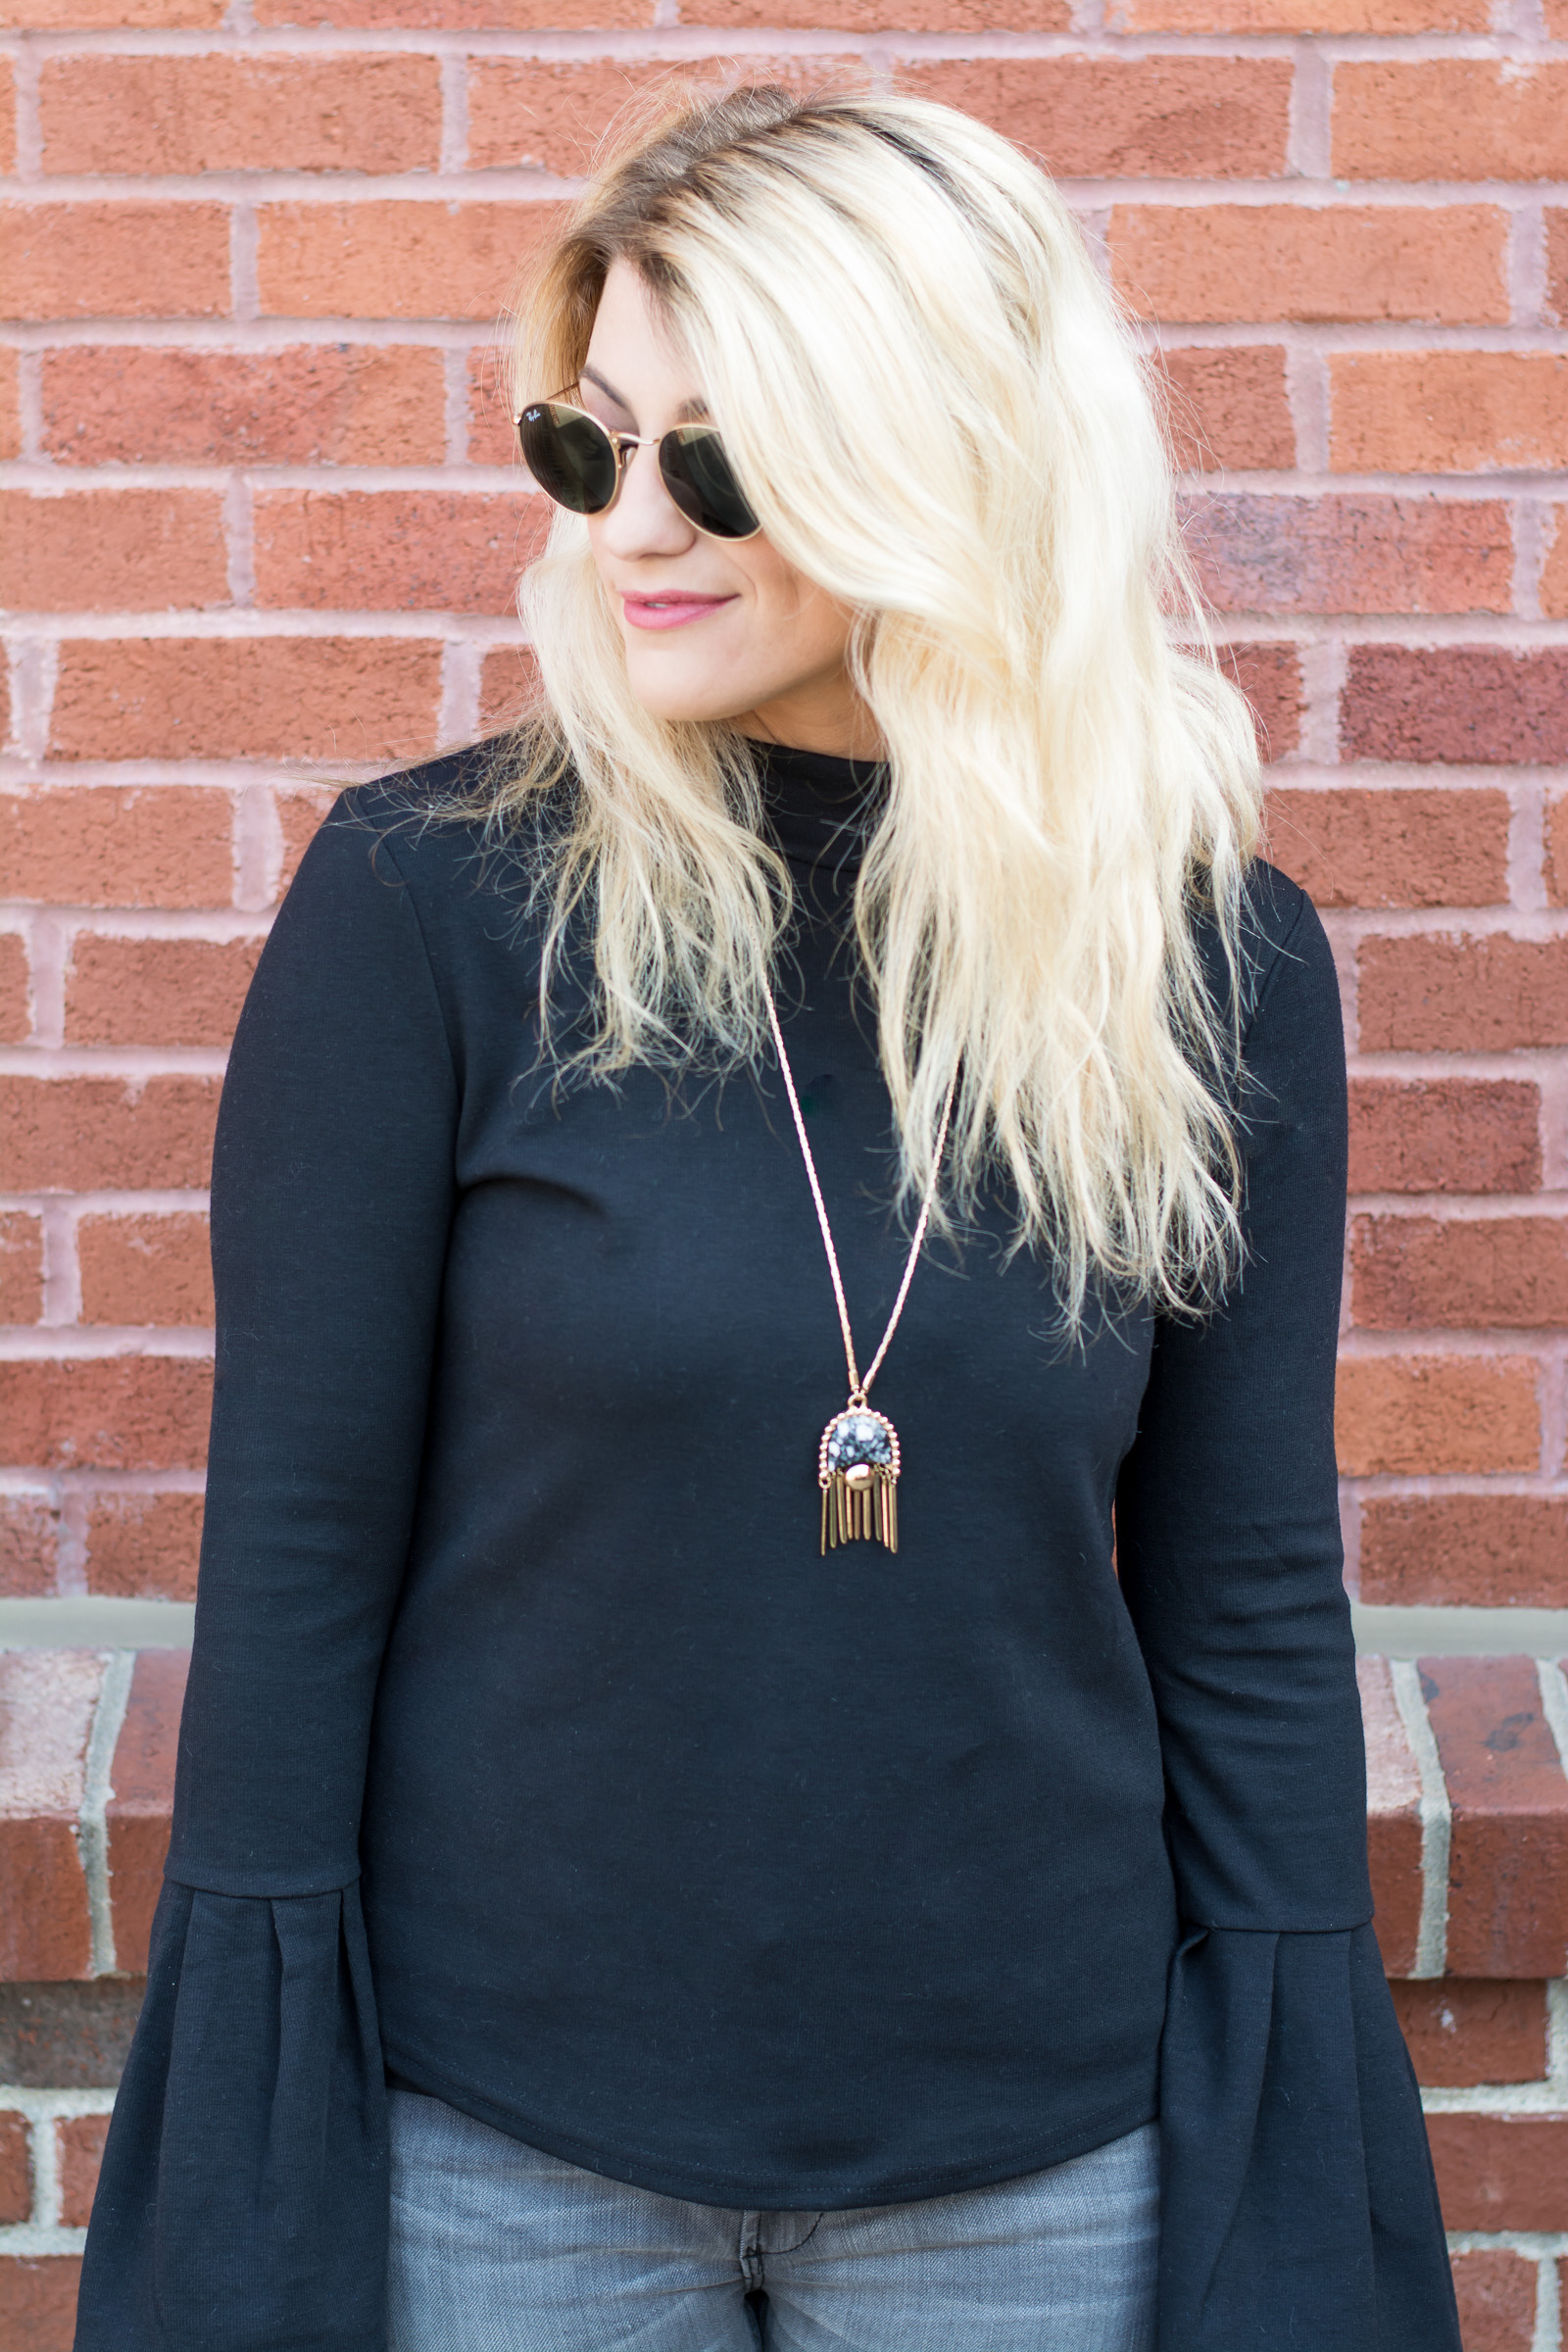 Black Sweater with Bell Sleeves. | Ashley from LSR